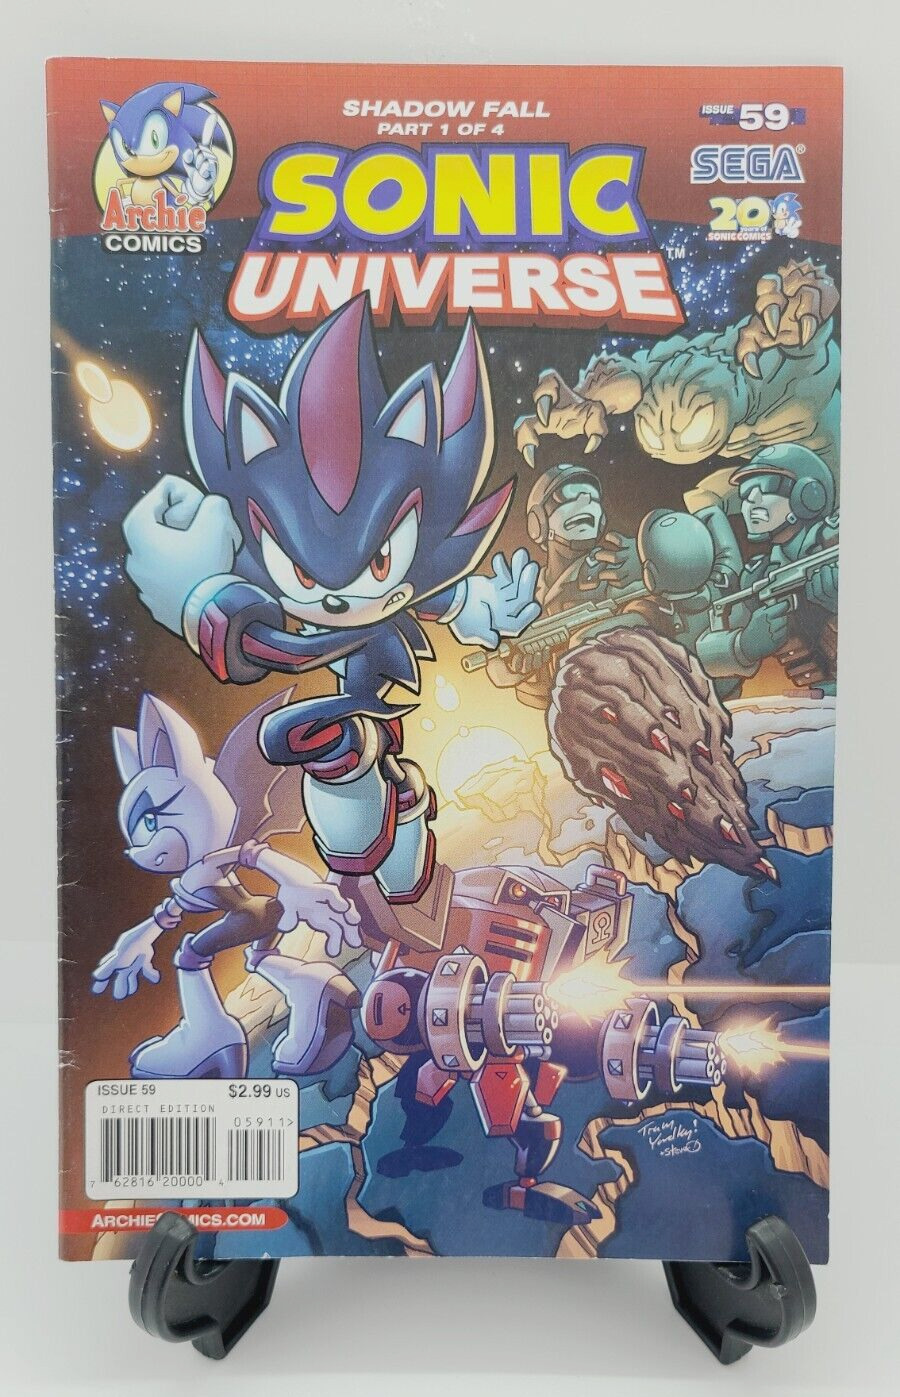 Sonic Universe Comic 59 - Shadow Fall Part 1 of 4